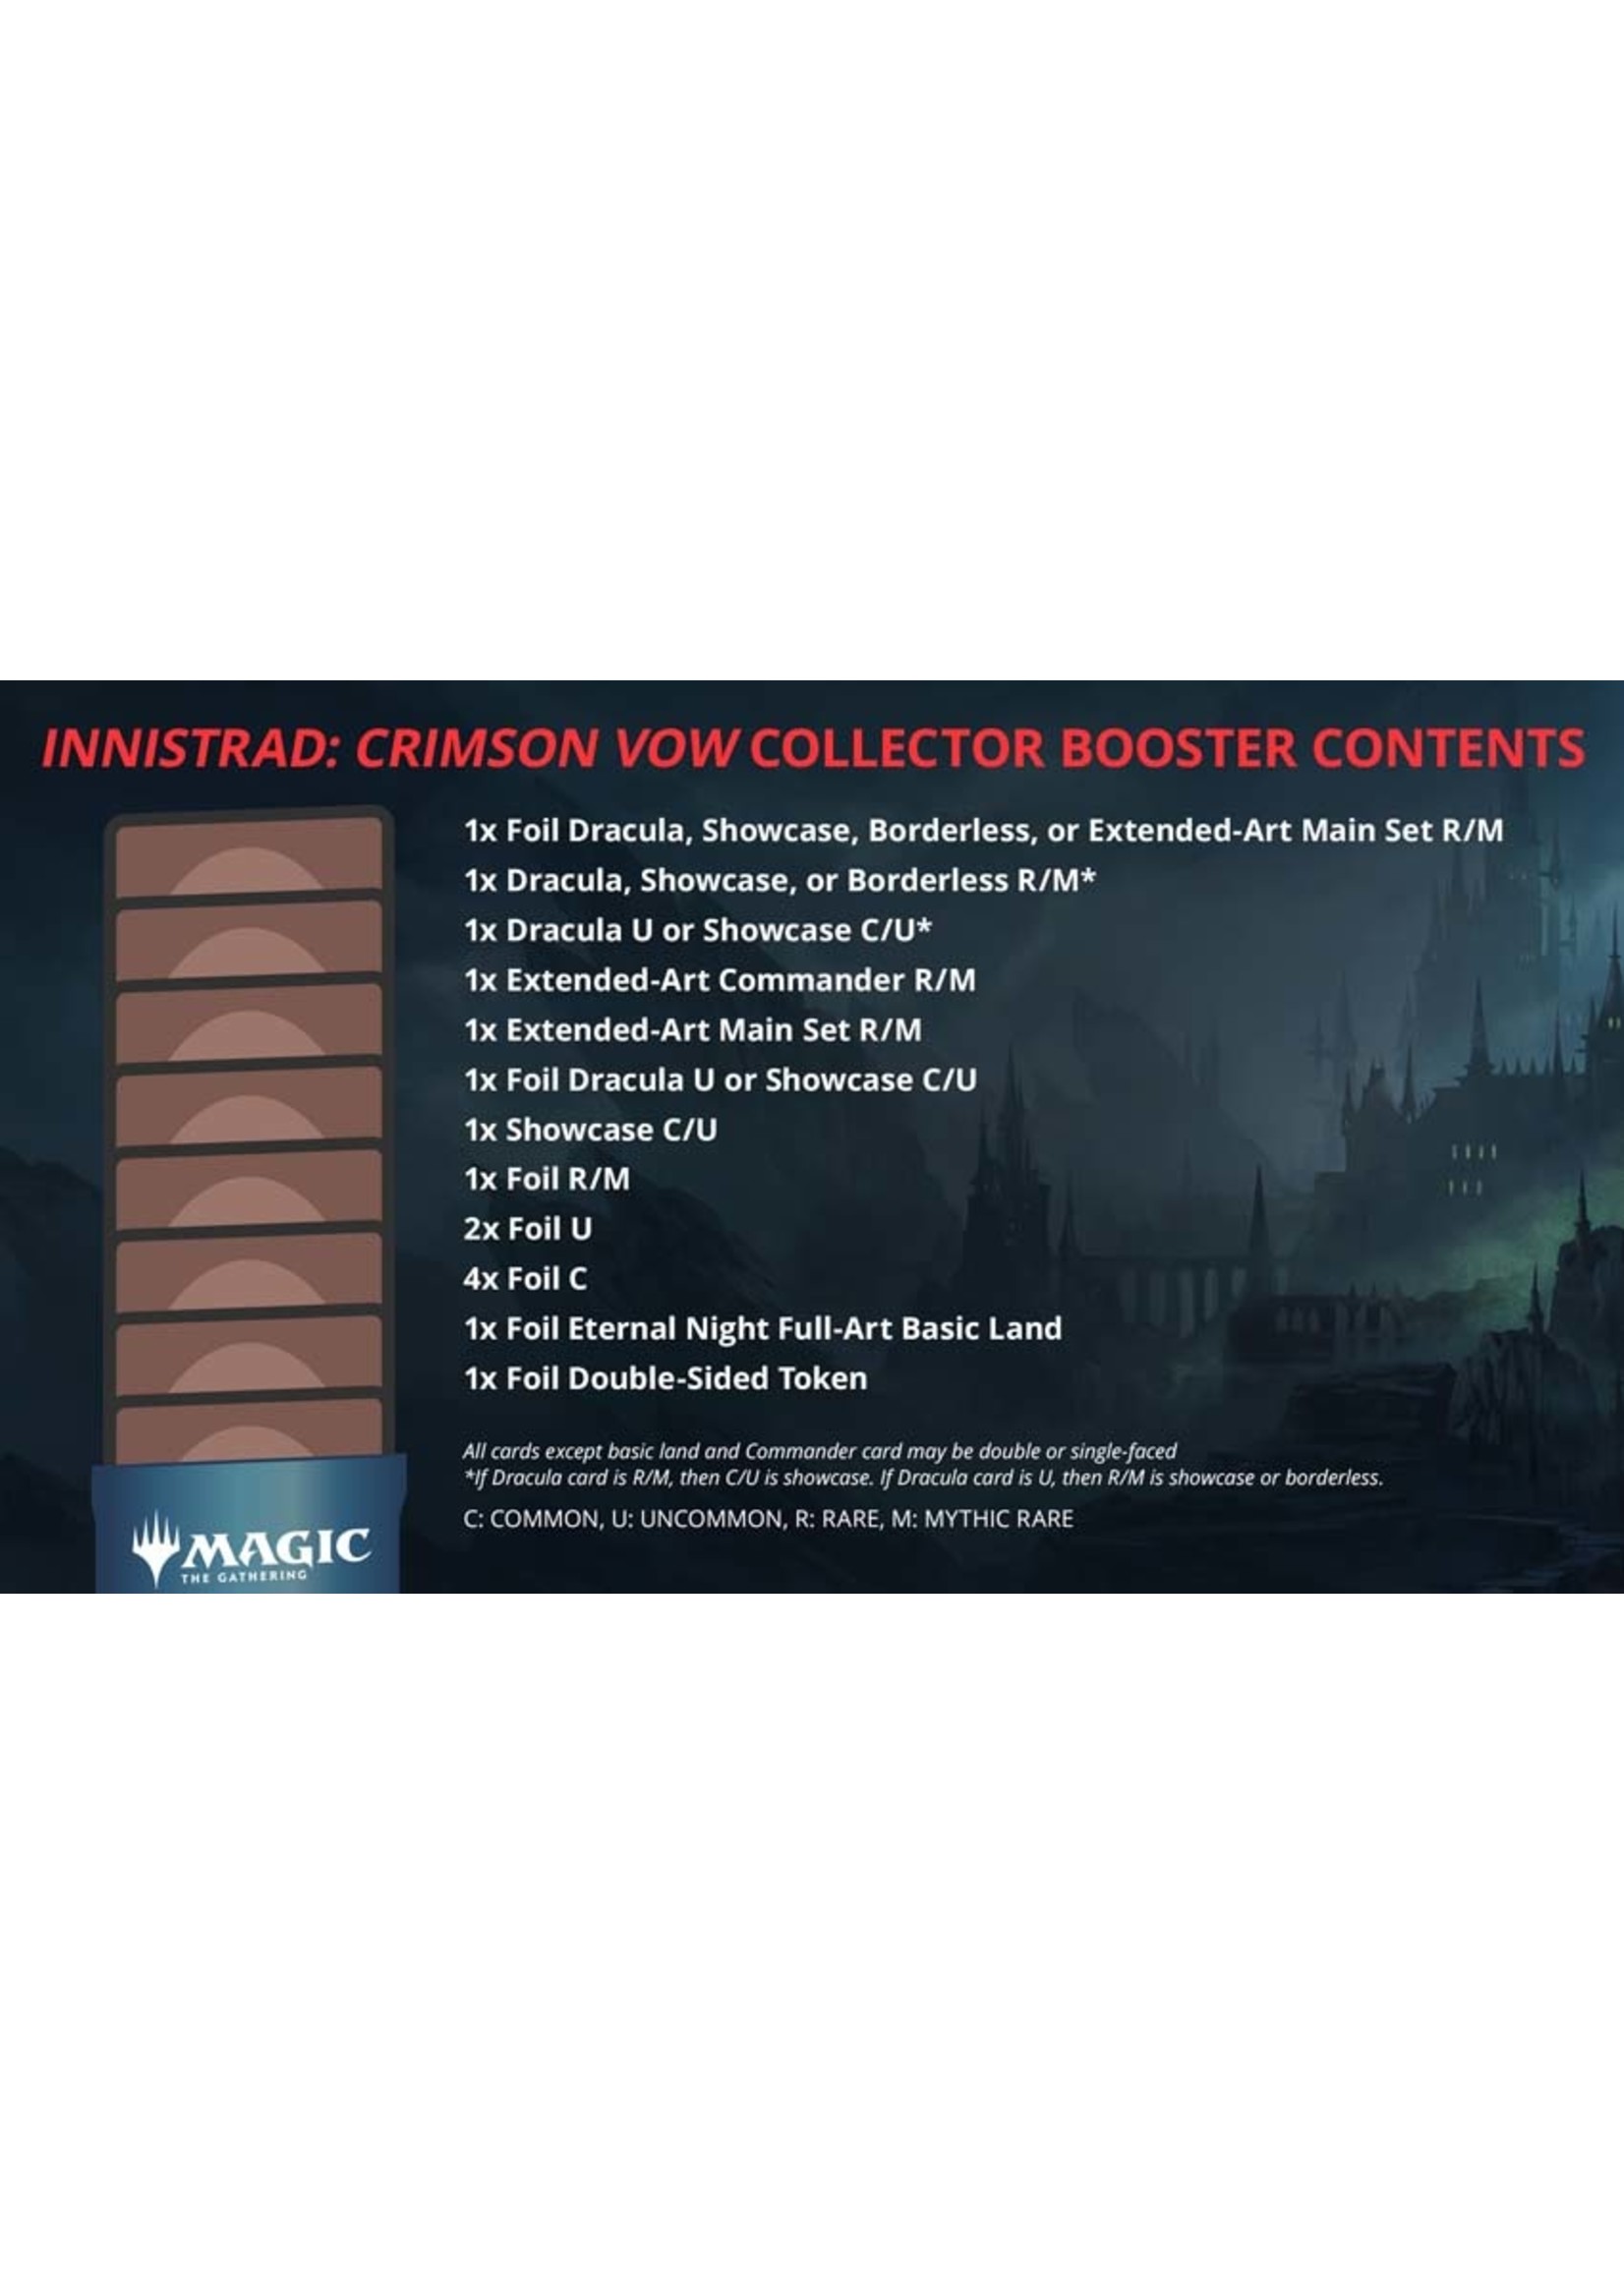 Magic: The Gathering MtG: Innistrad Crimson Vow Collector Booster Display (12)